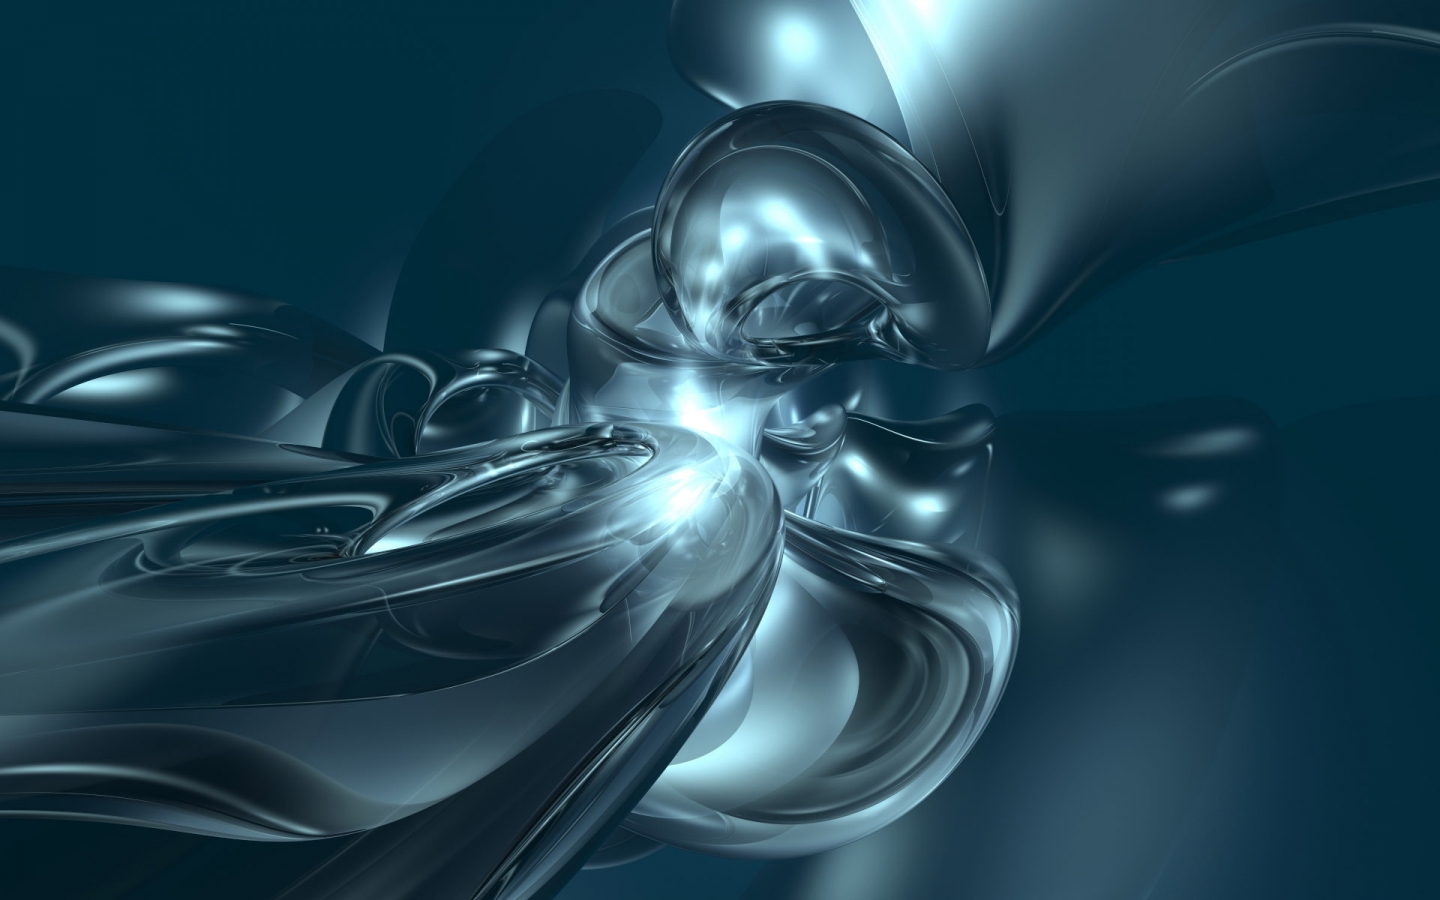 Abstract 3D Creation for 1440 x 900 widescreen resolution